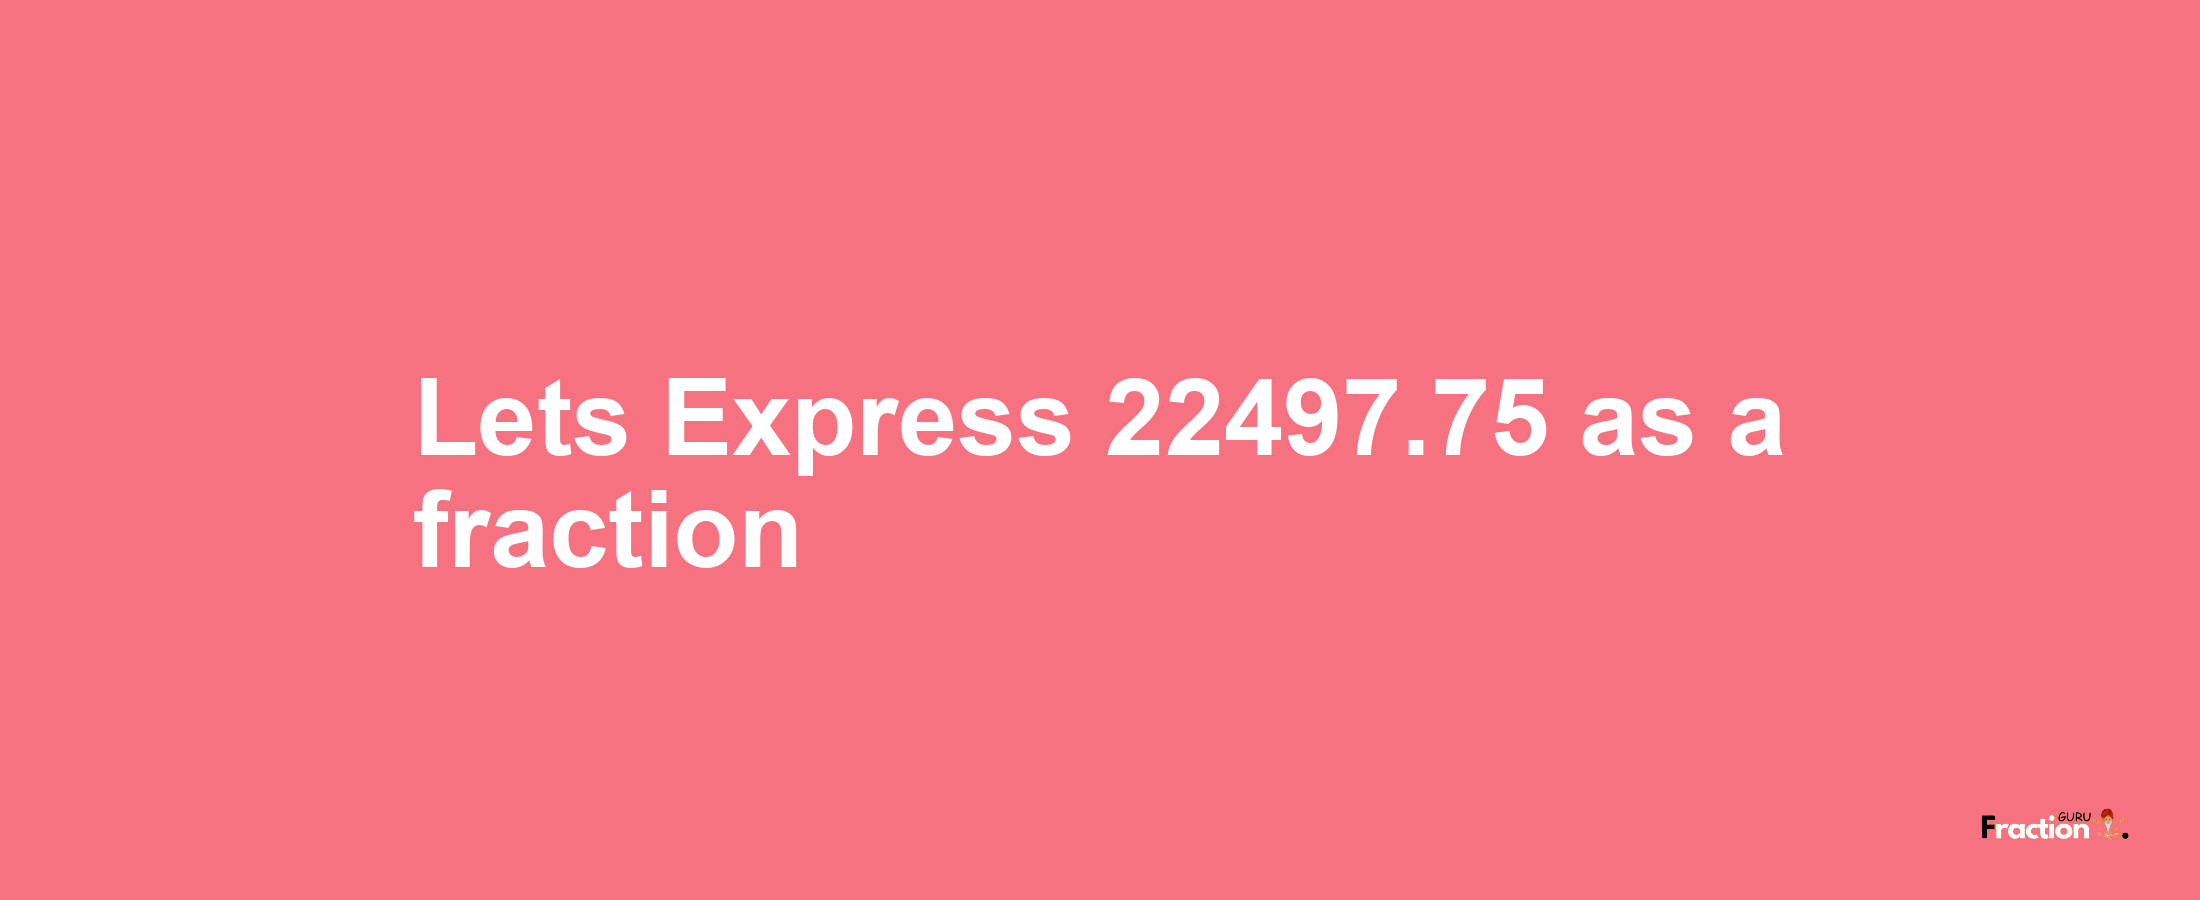 Lets Express 22497.75 as afraction